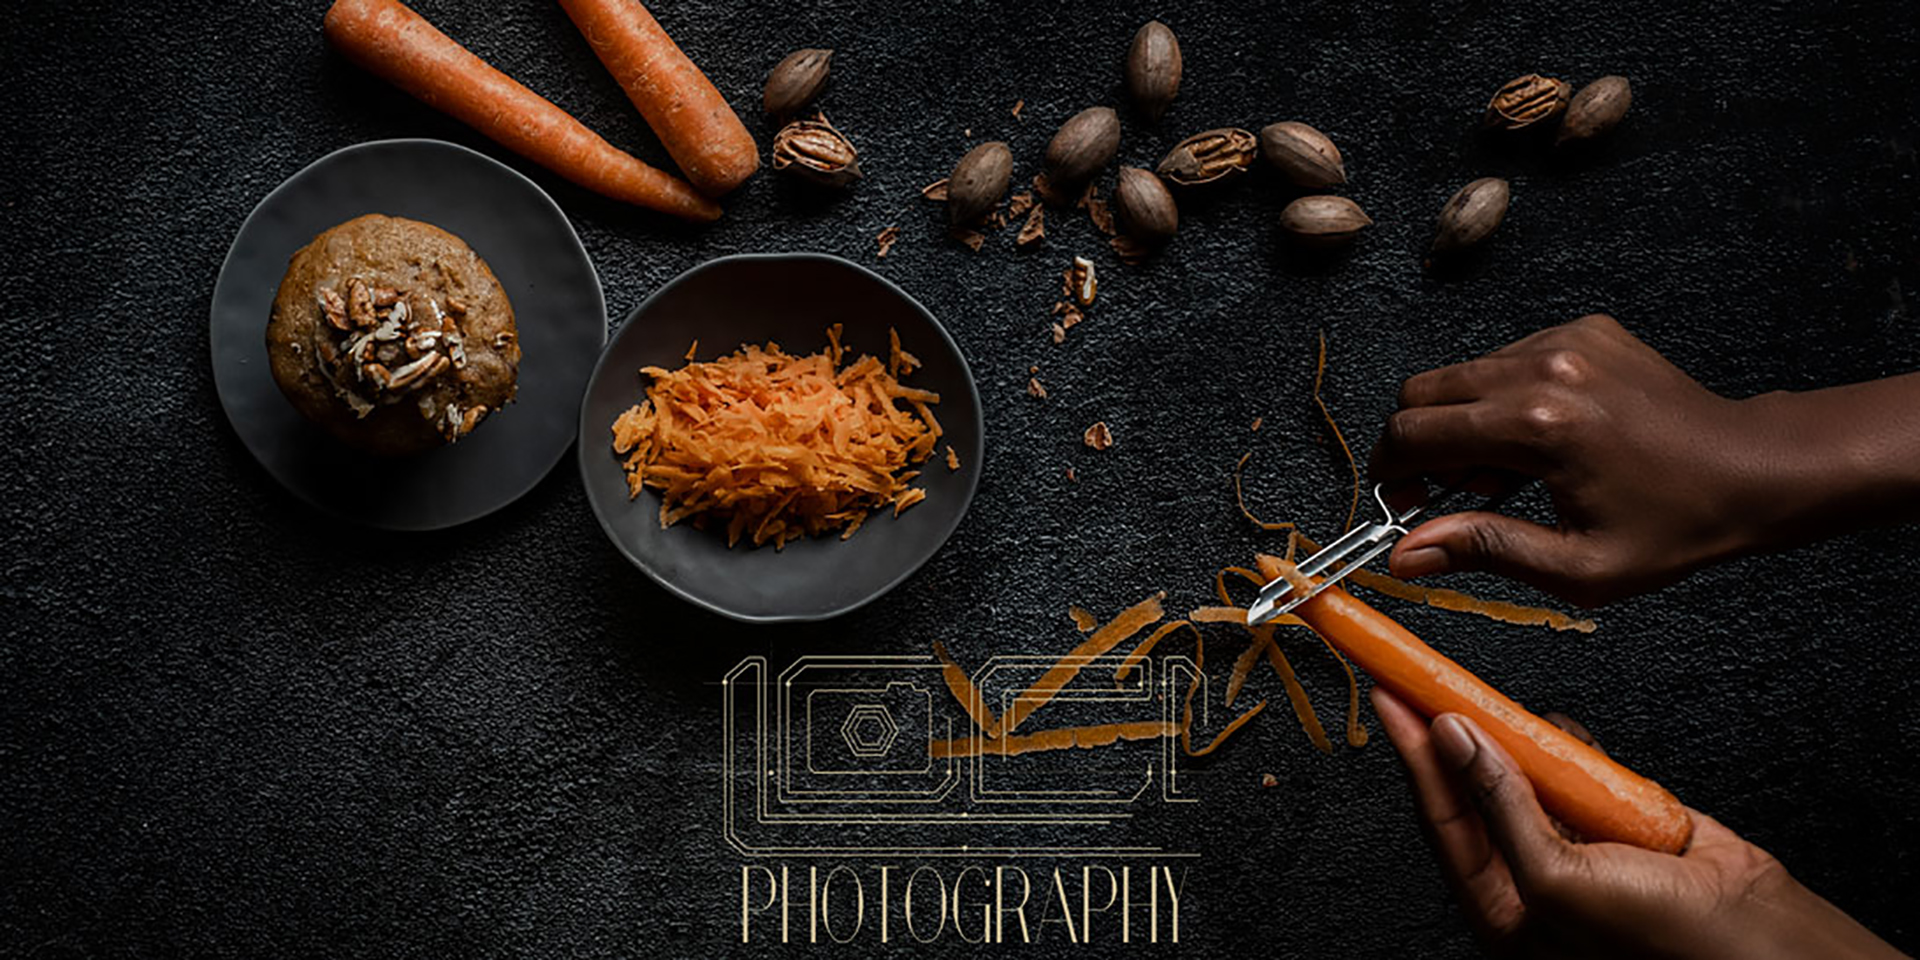 Branding photography for clients